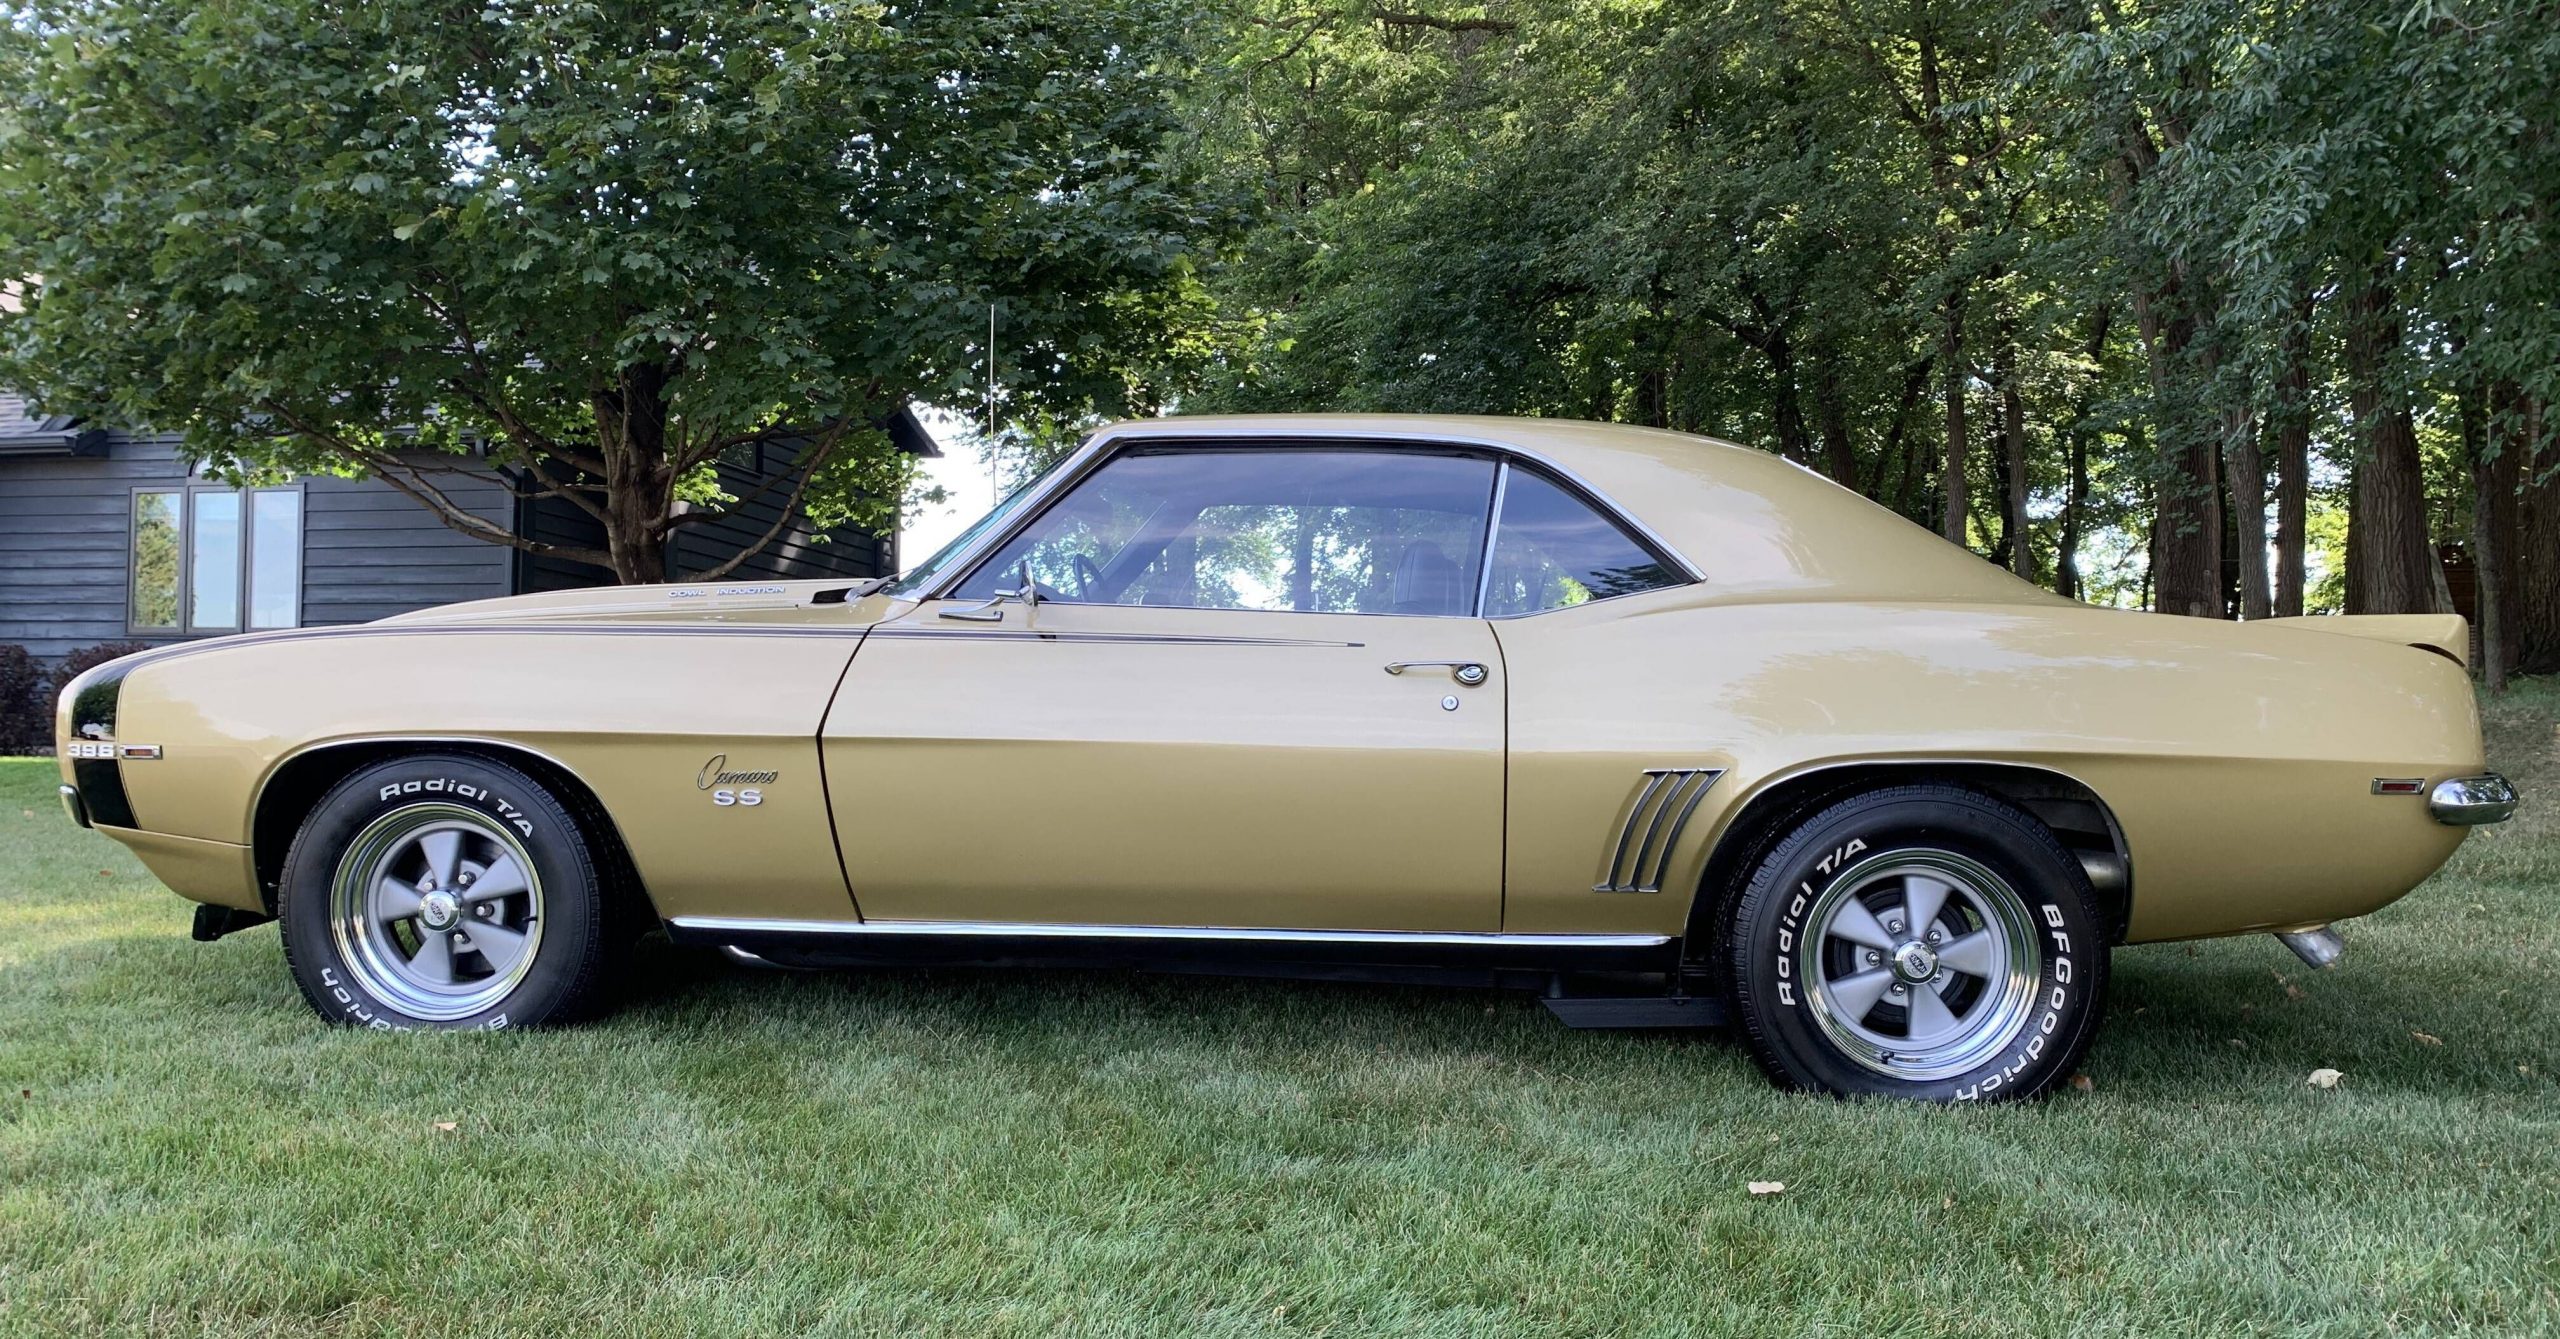 Hemmings Auction Find of the Week: 1969 Camaro SS 396